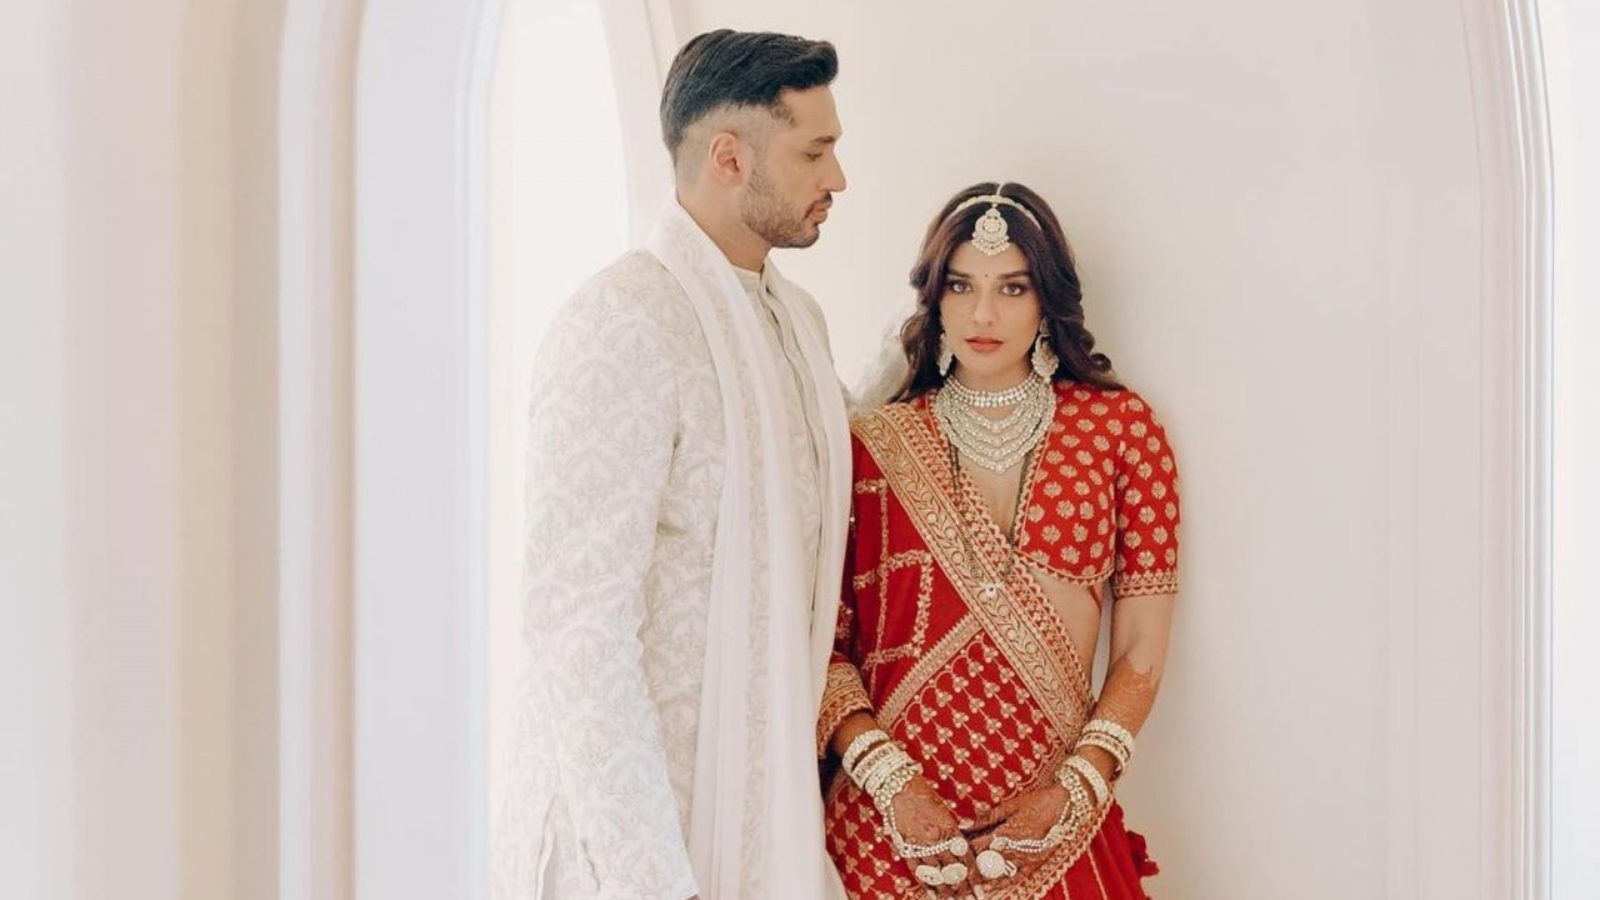 Arjun Kanungo, Carla Dennis are married! Check out pics from their ceremonies